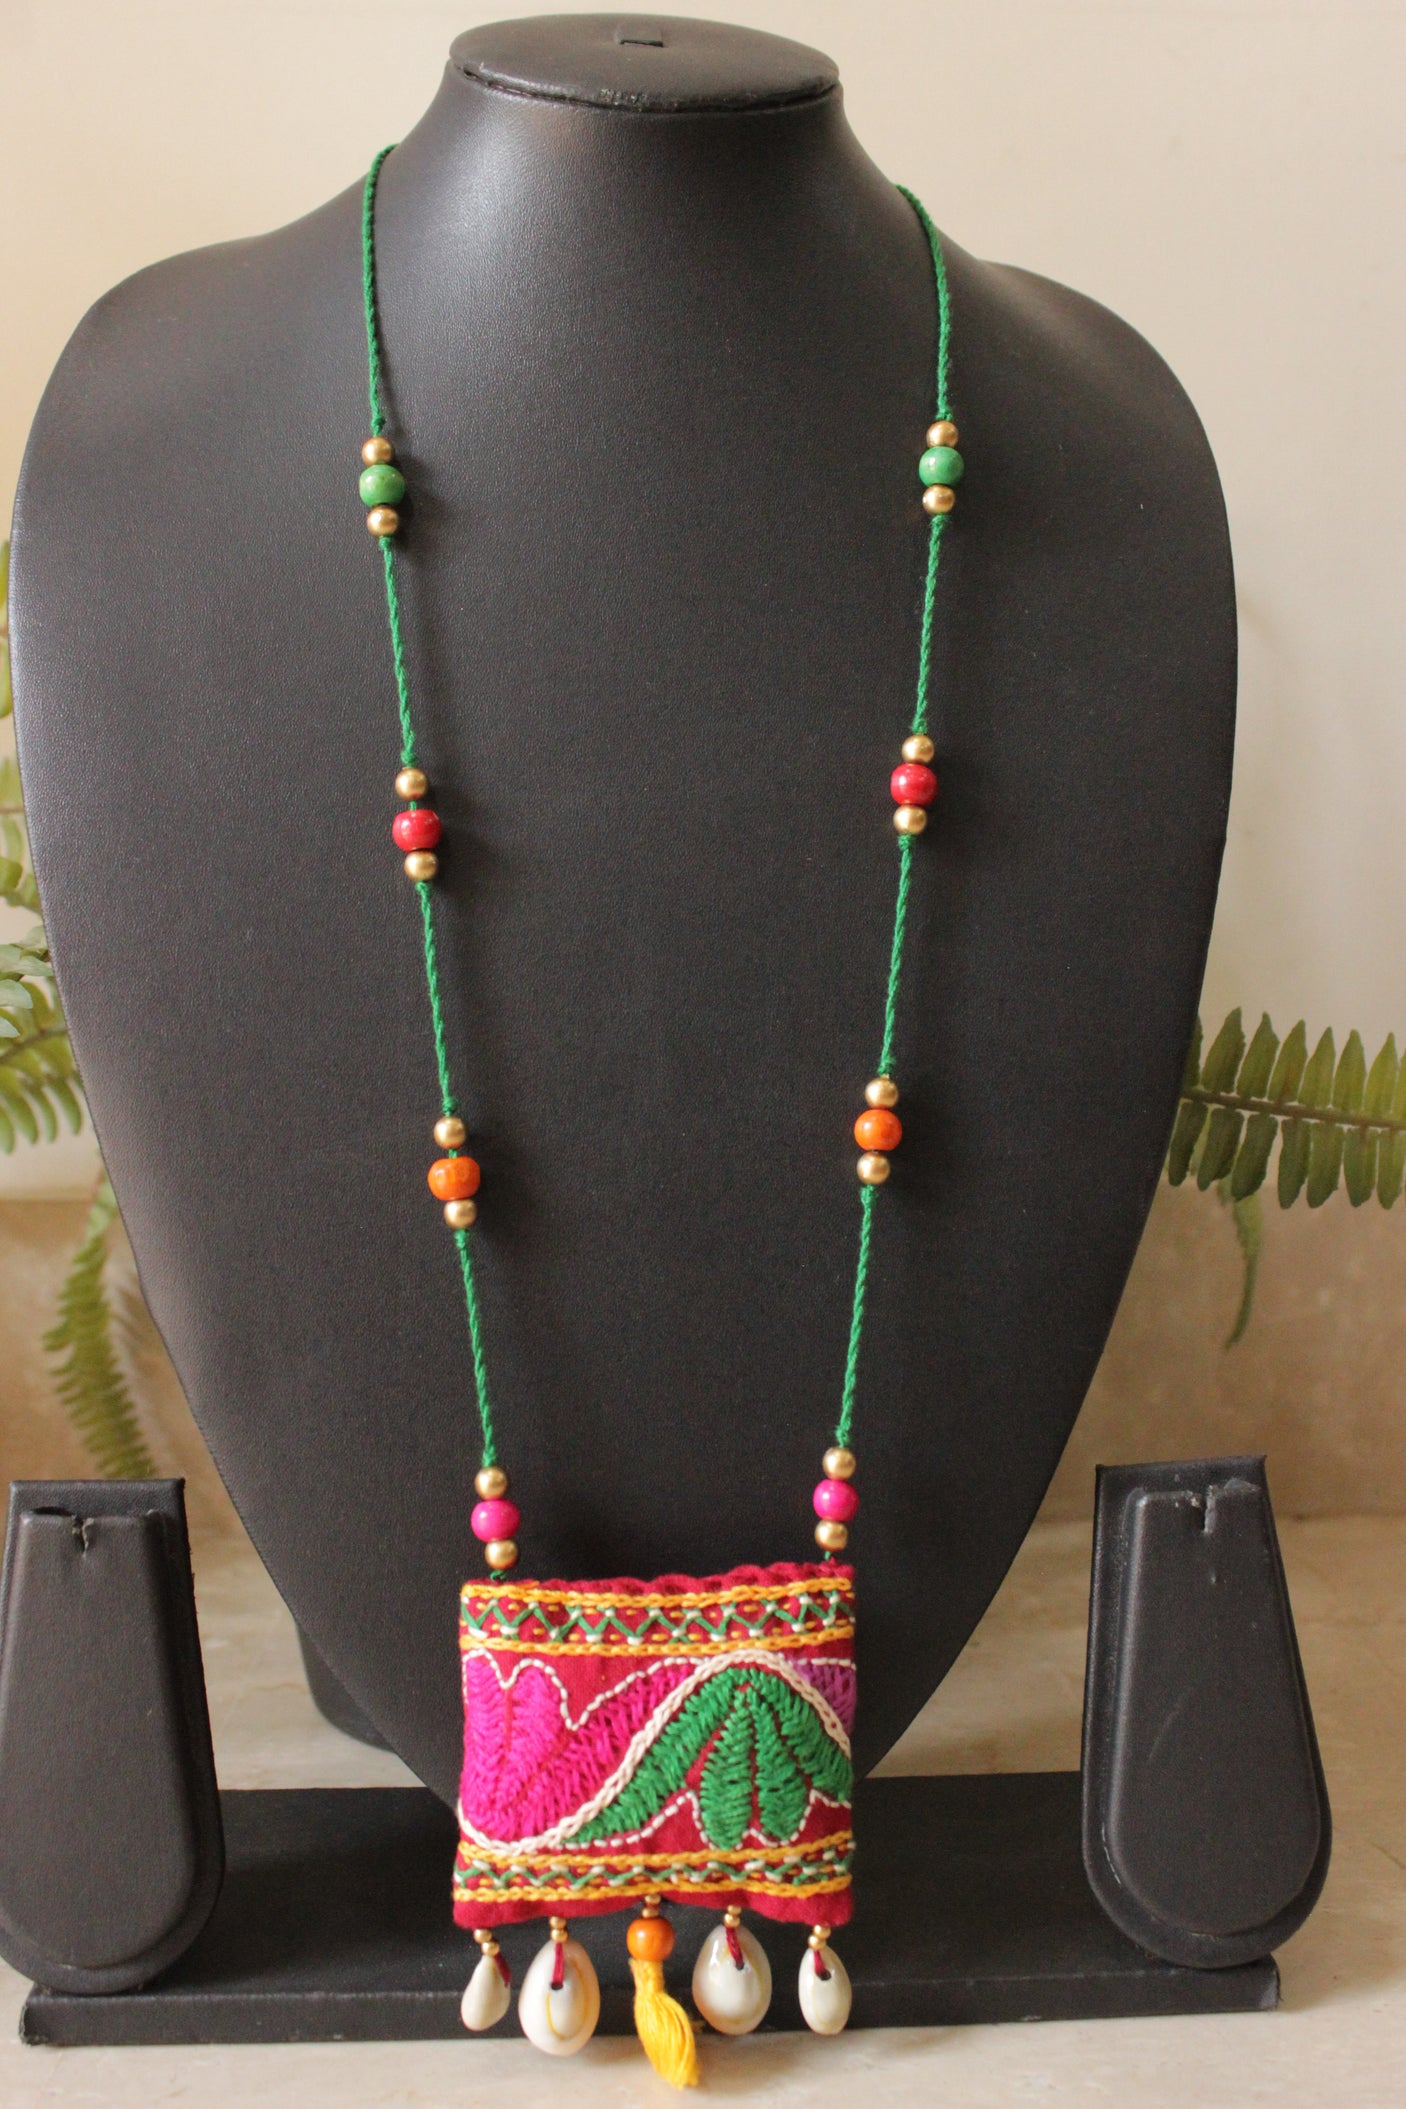 Hand Embroidered Multi-Color Rope Closure Handcrafted Fabric Necklace with Adjustable Closure